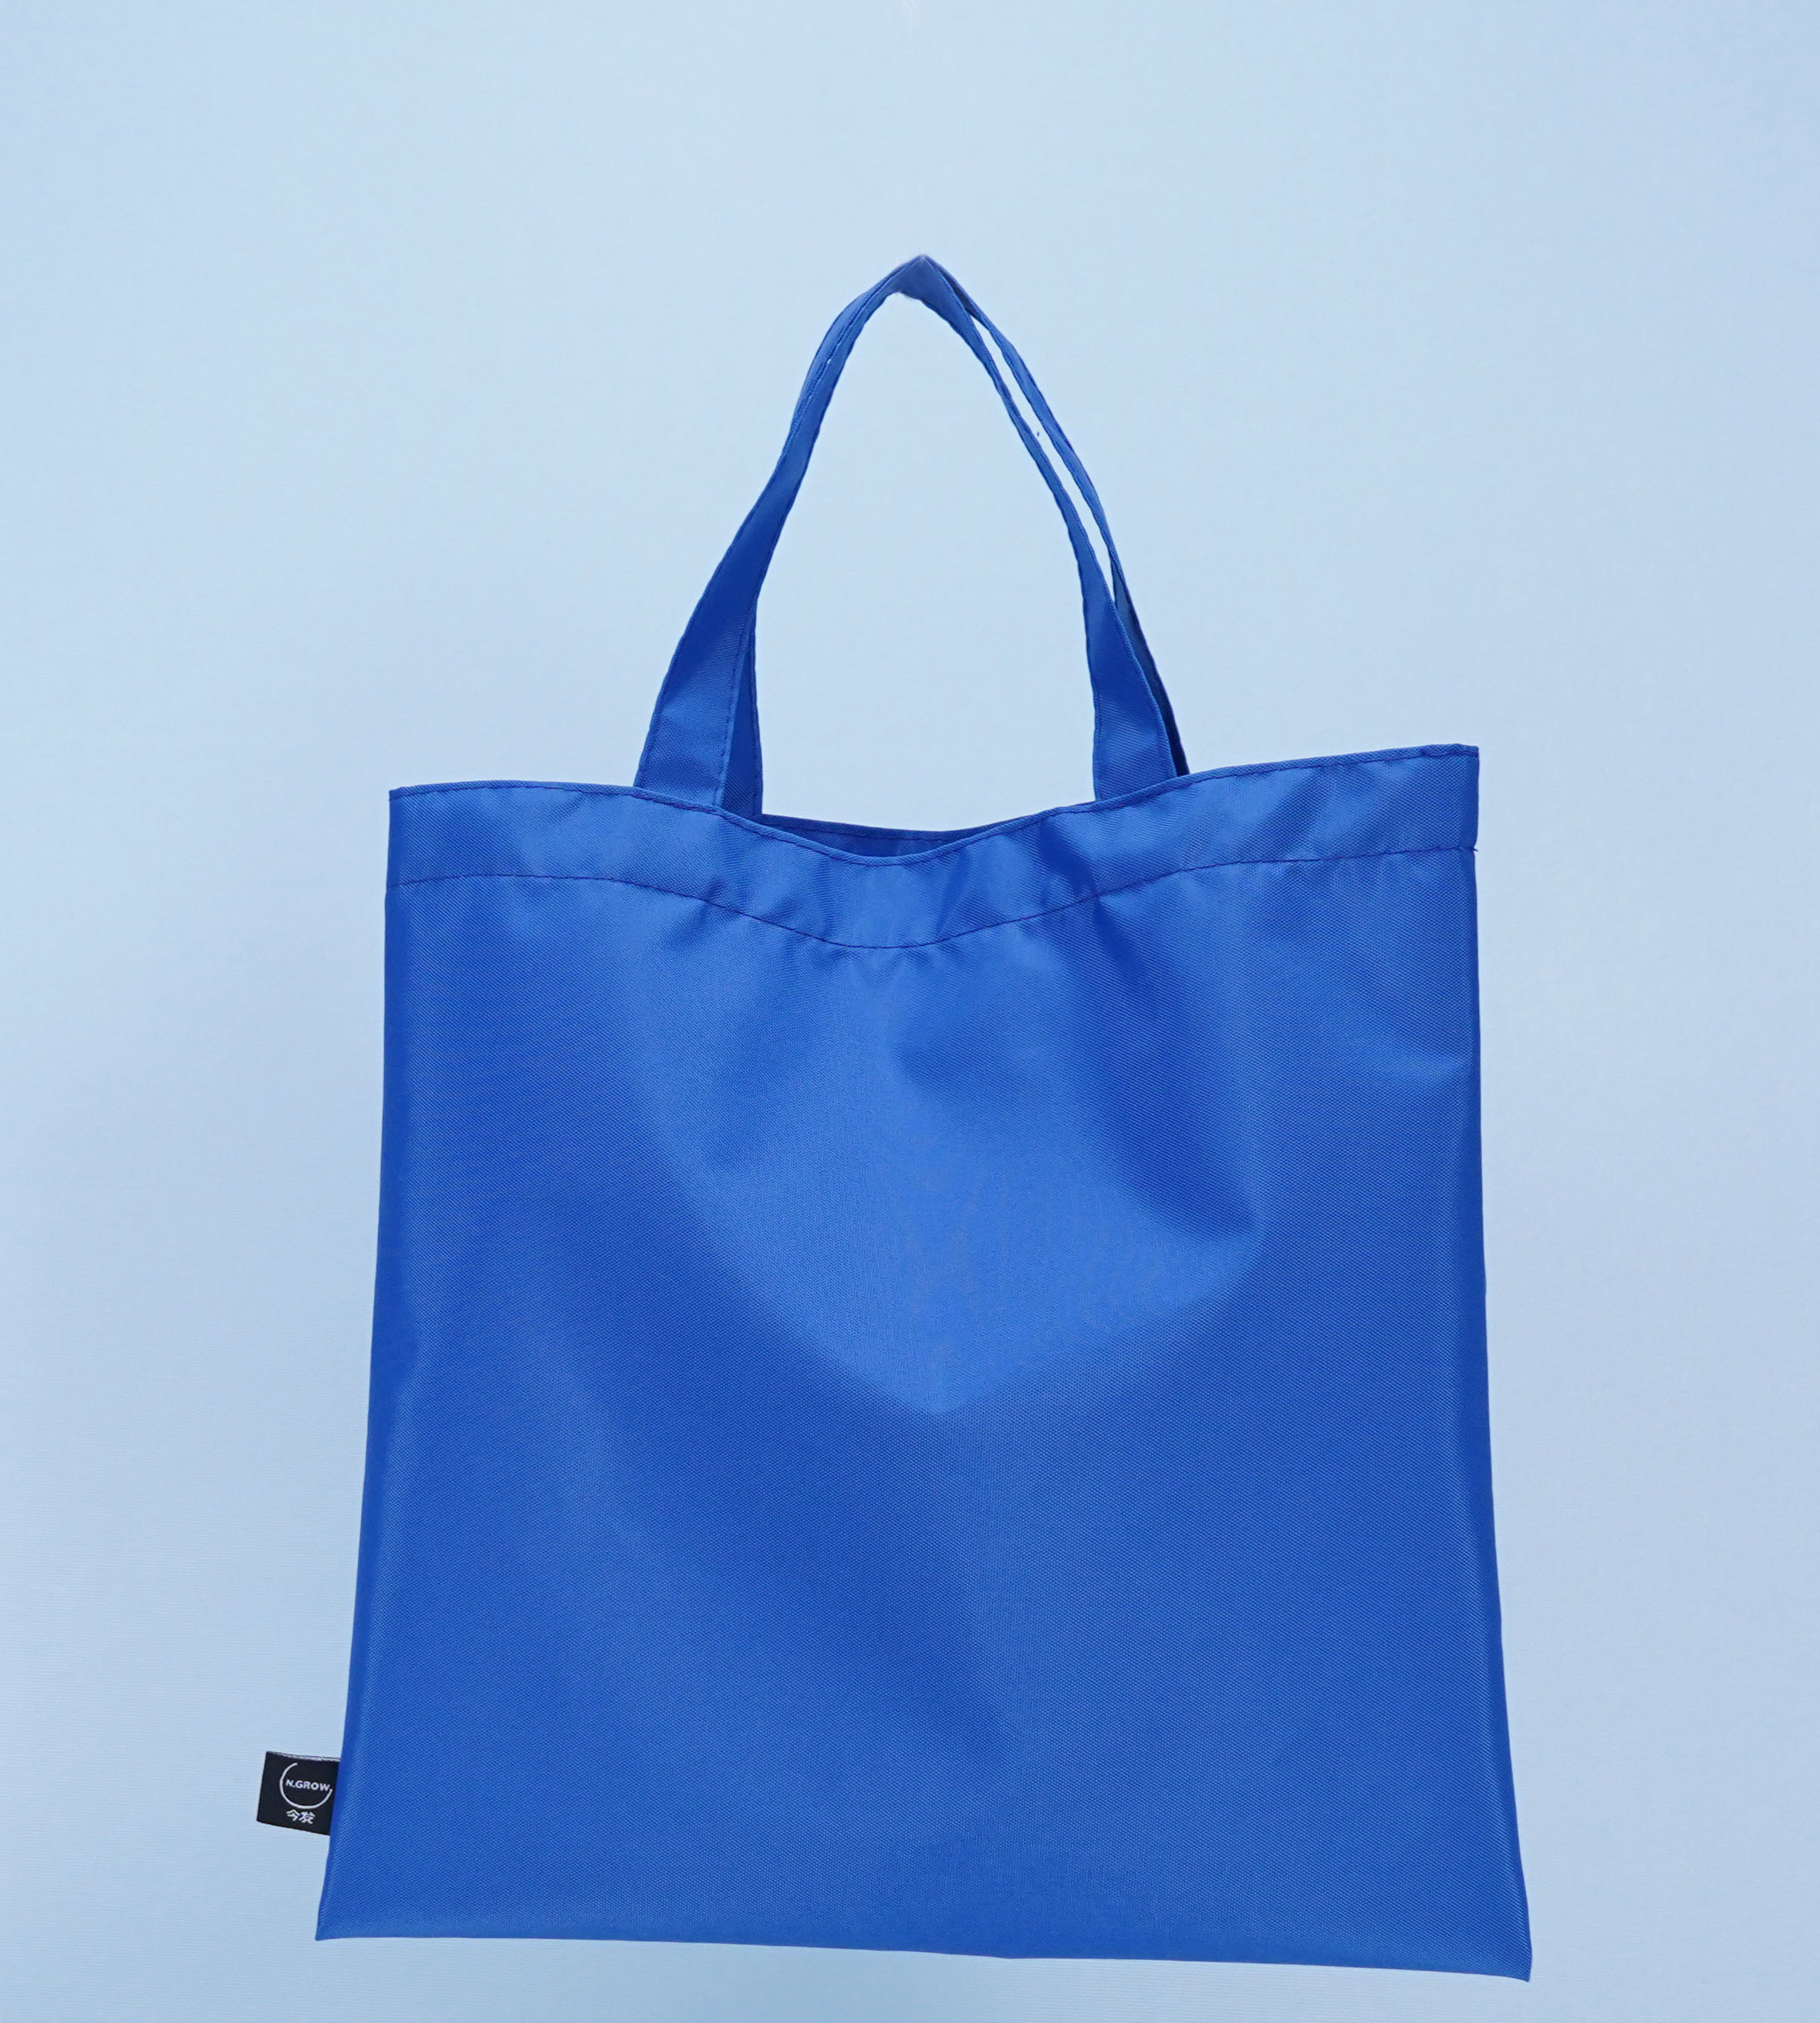 Versatile and Trendy: Make a Statement with a Customized Nylon Polyester Tote Bag